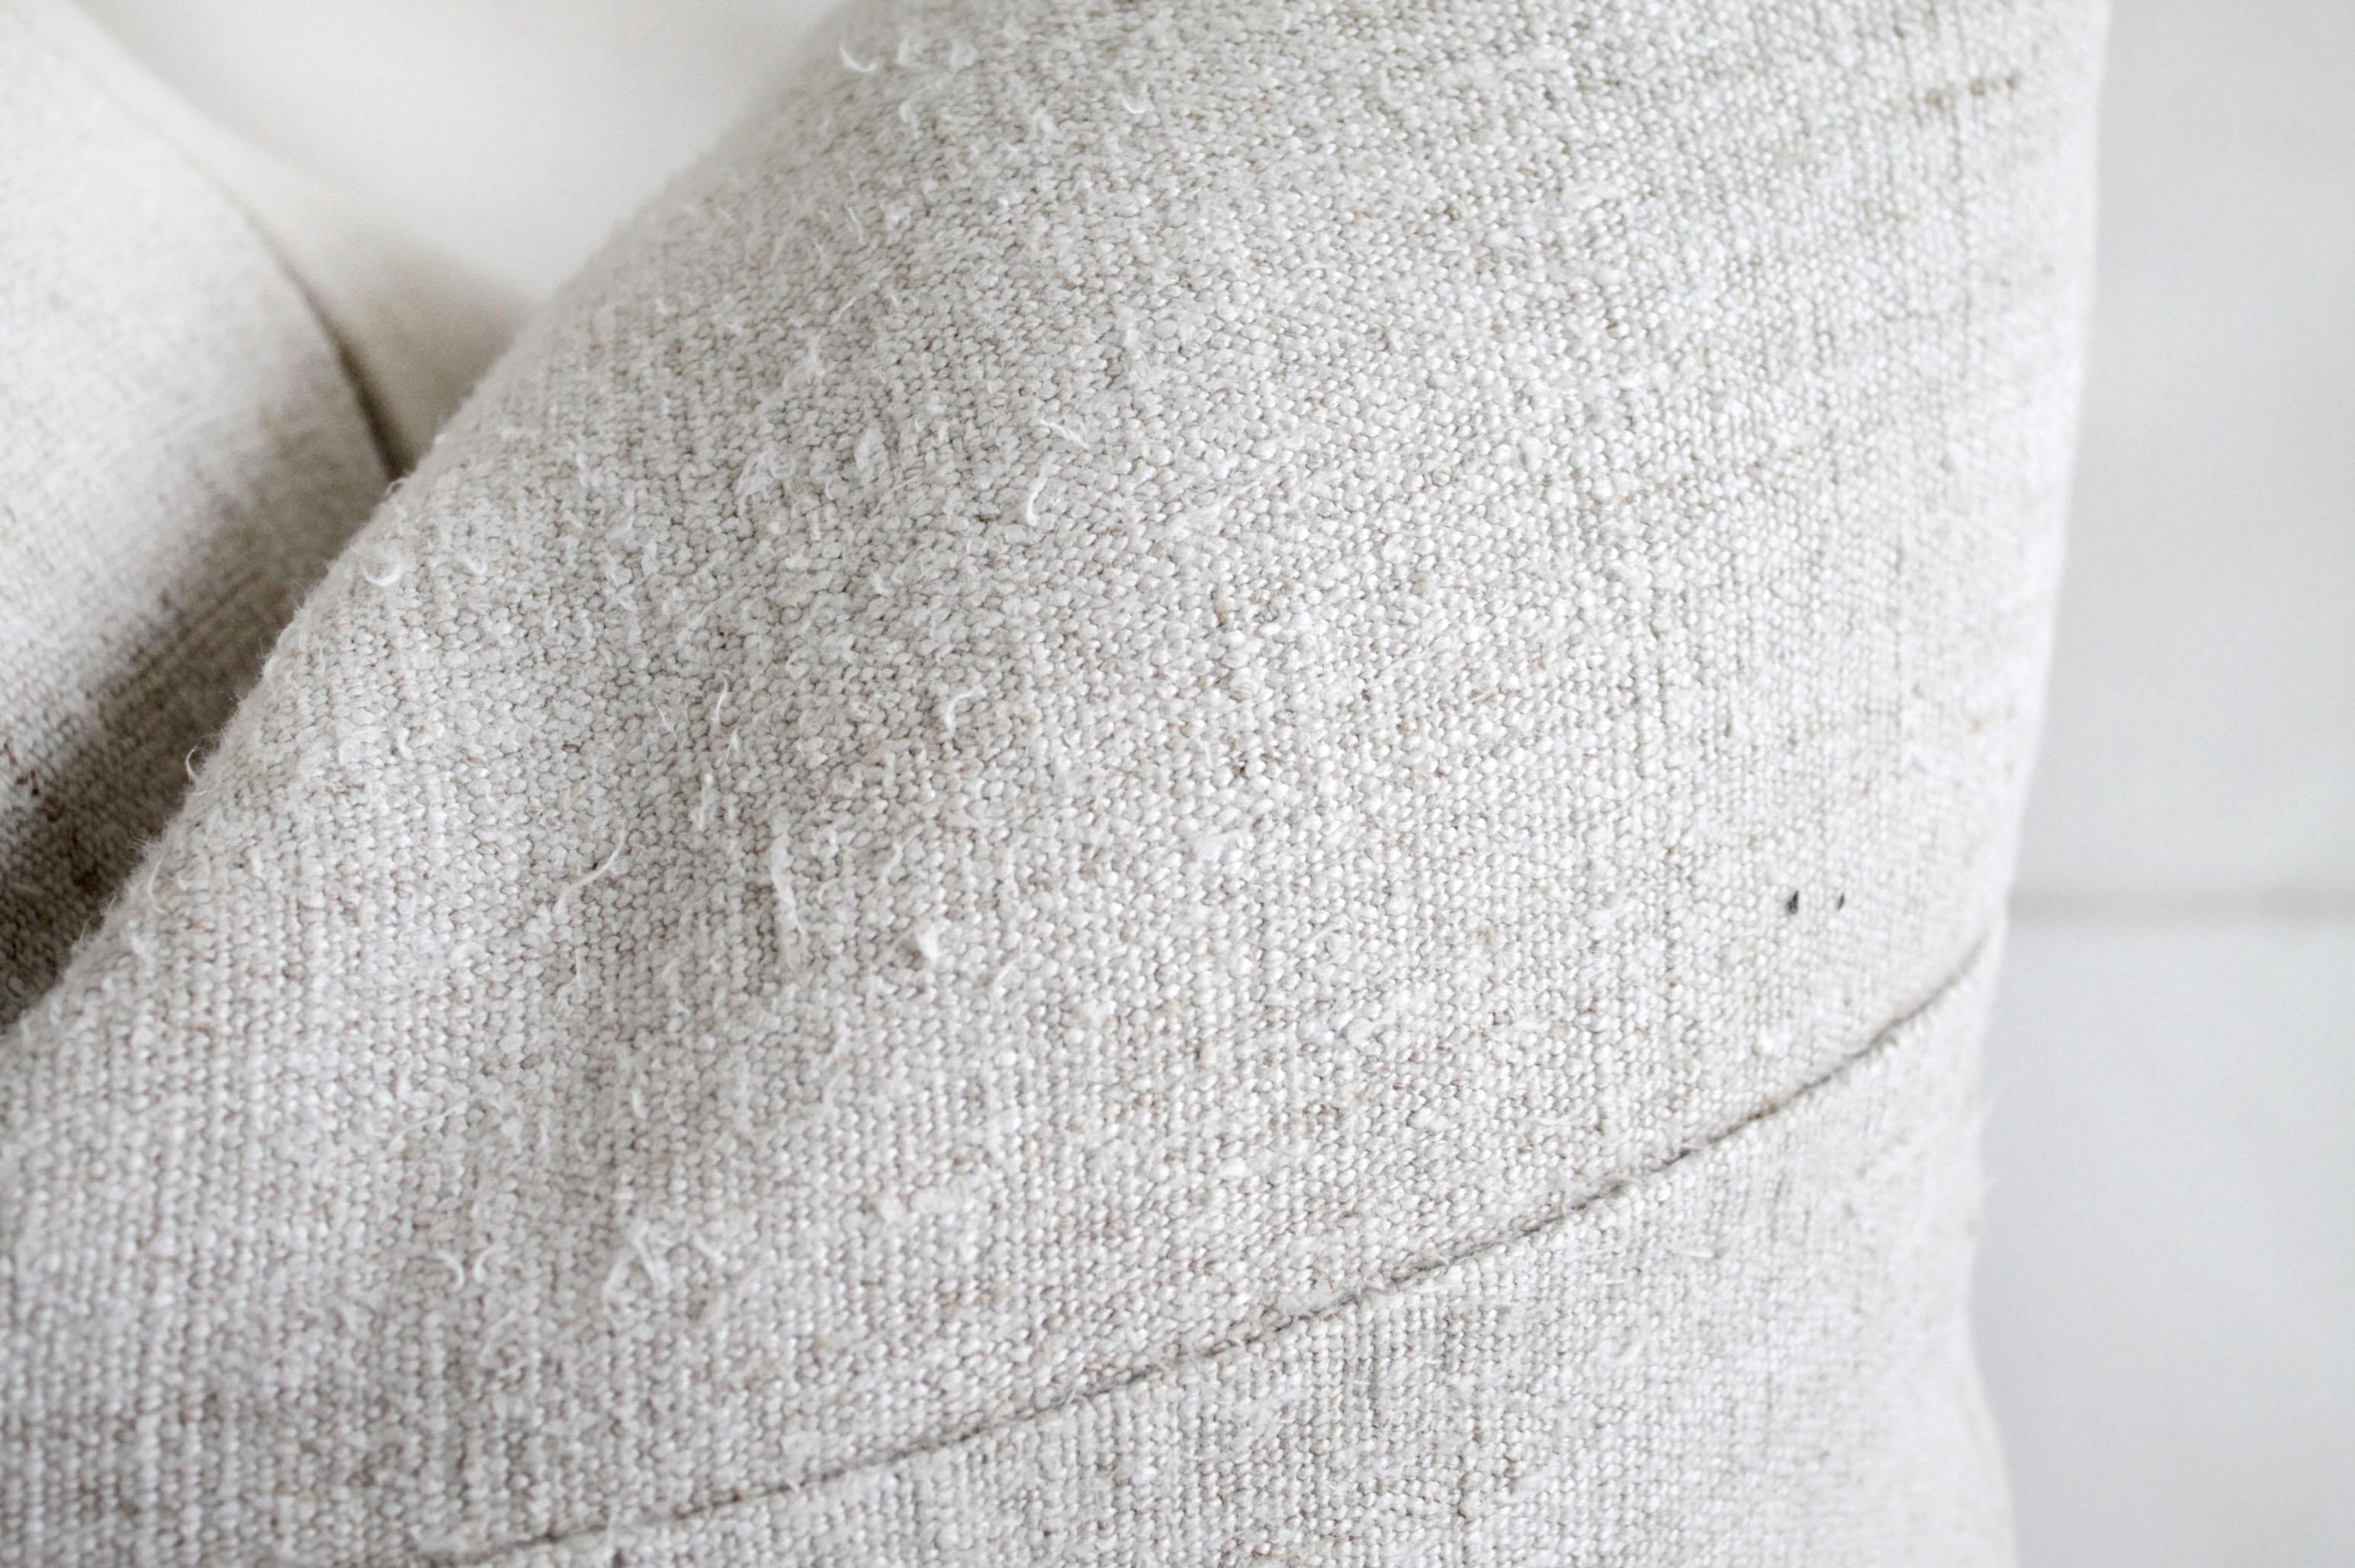 Antique French linen textile pillow with seam
Off white antique French linen textured grain sack pillow with original seam, backside is in a natural soft Irish linen.
Hidden zipper closure. 
Measures: 17